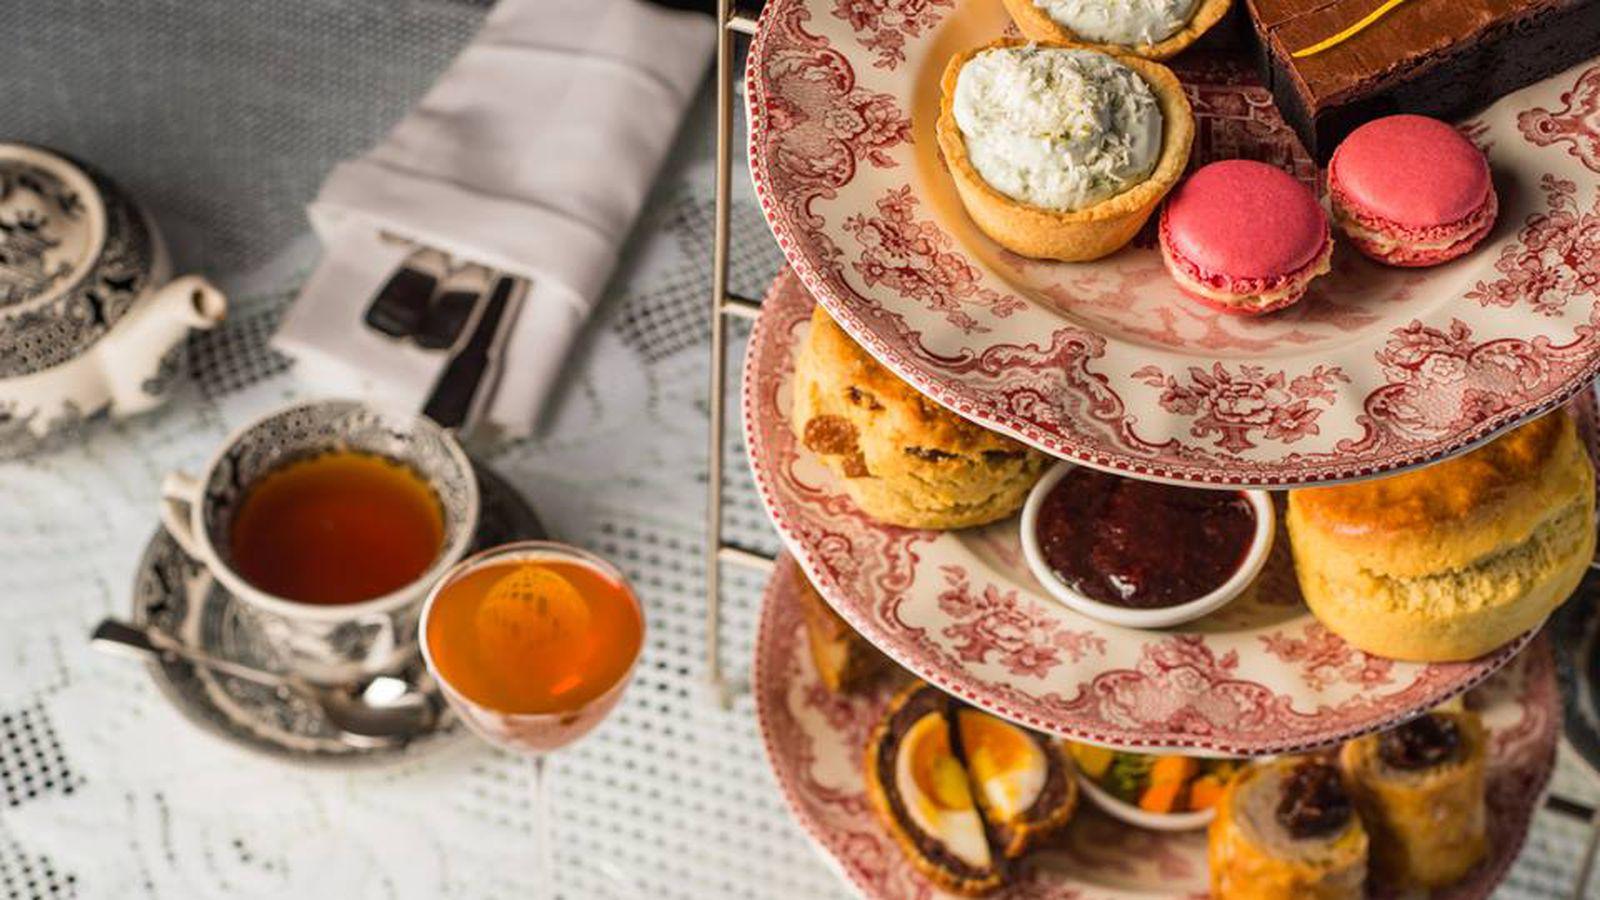 Where to Have Afternoon Tea in London